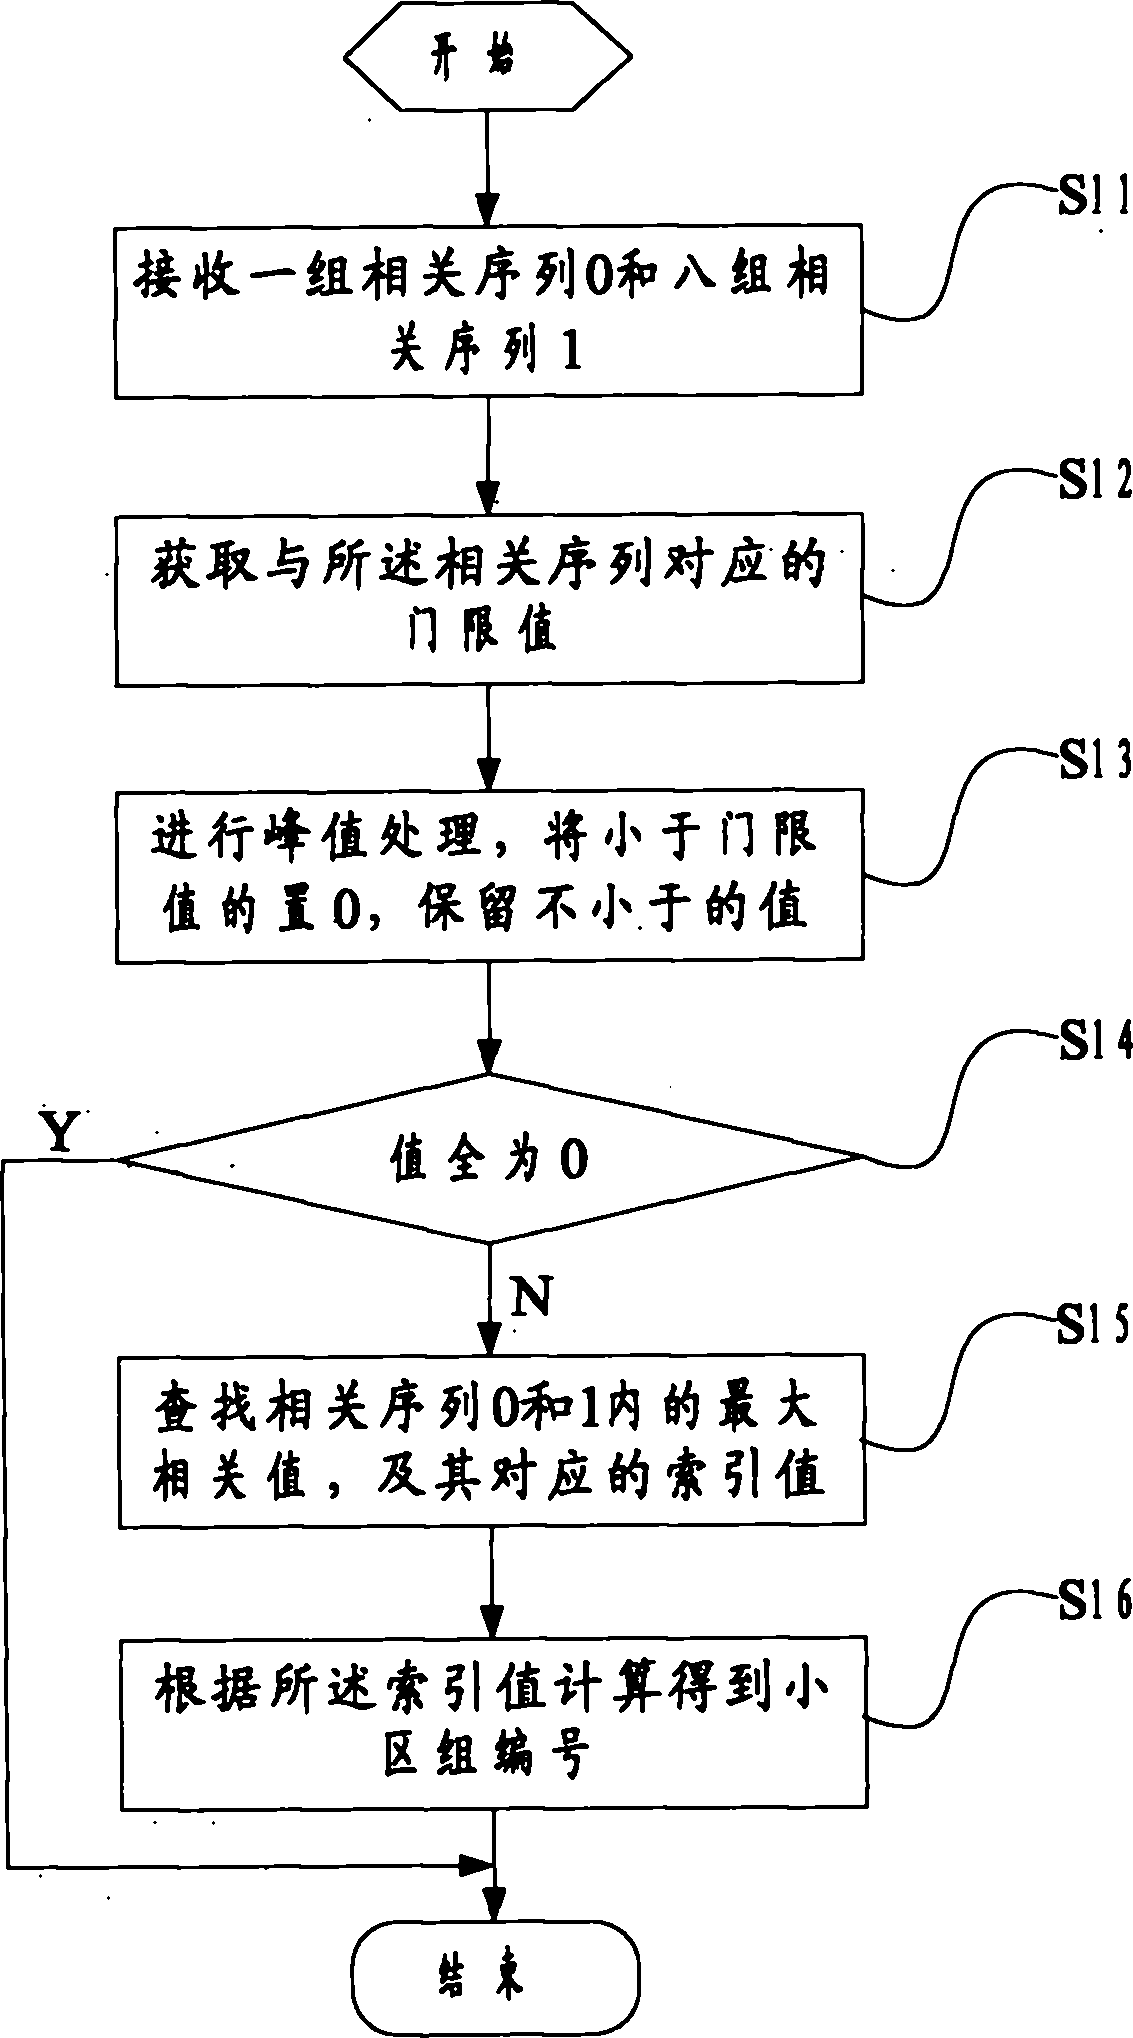 Detection method and device for cell group numbers of secondary synchronization sequences of LTE (long term evolution) system